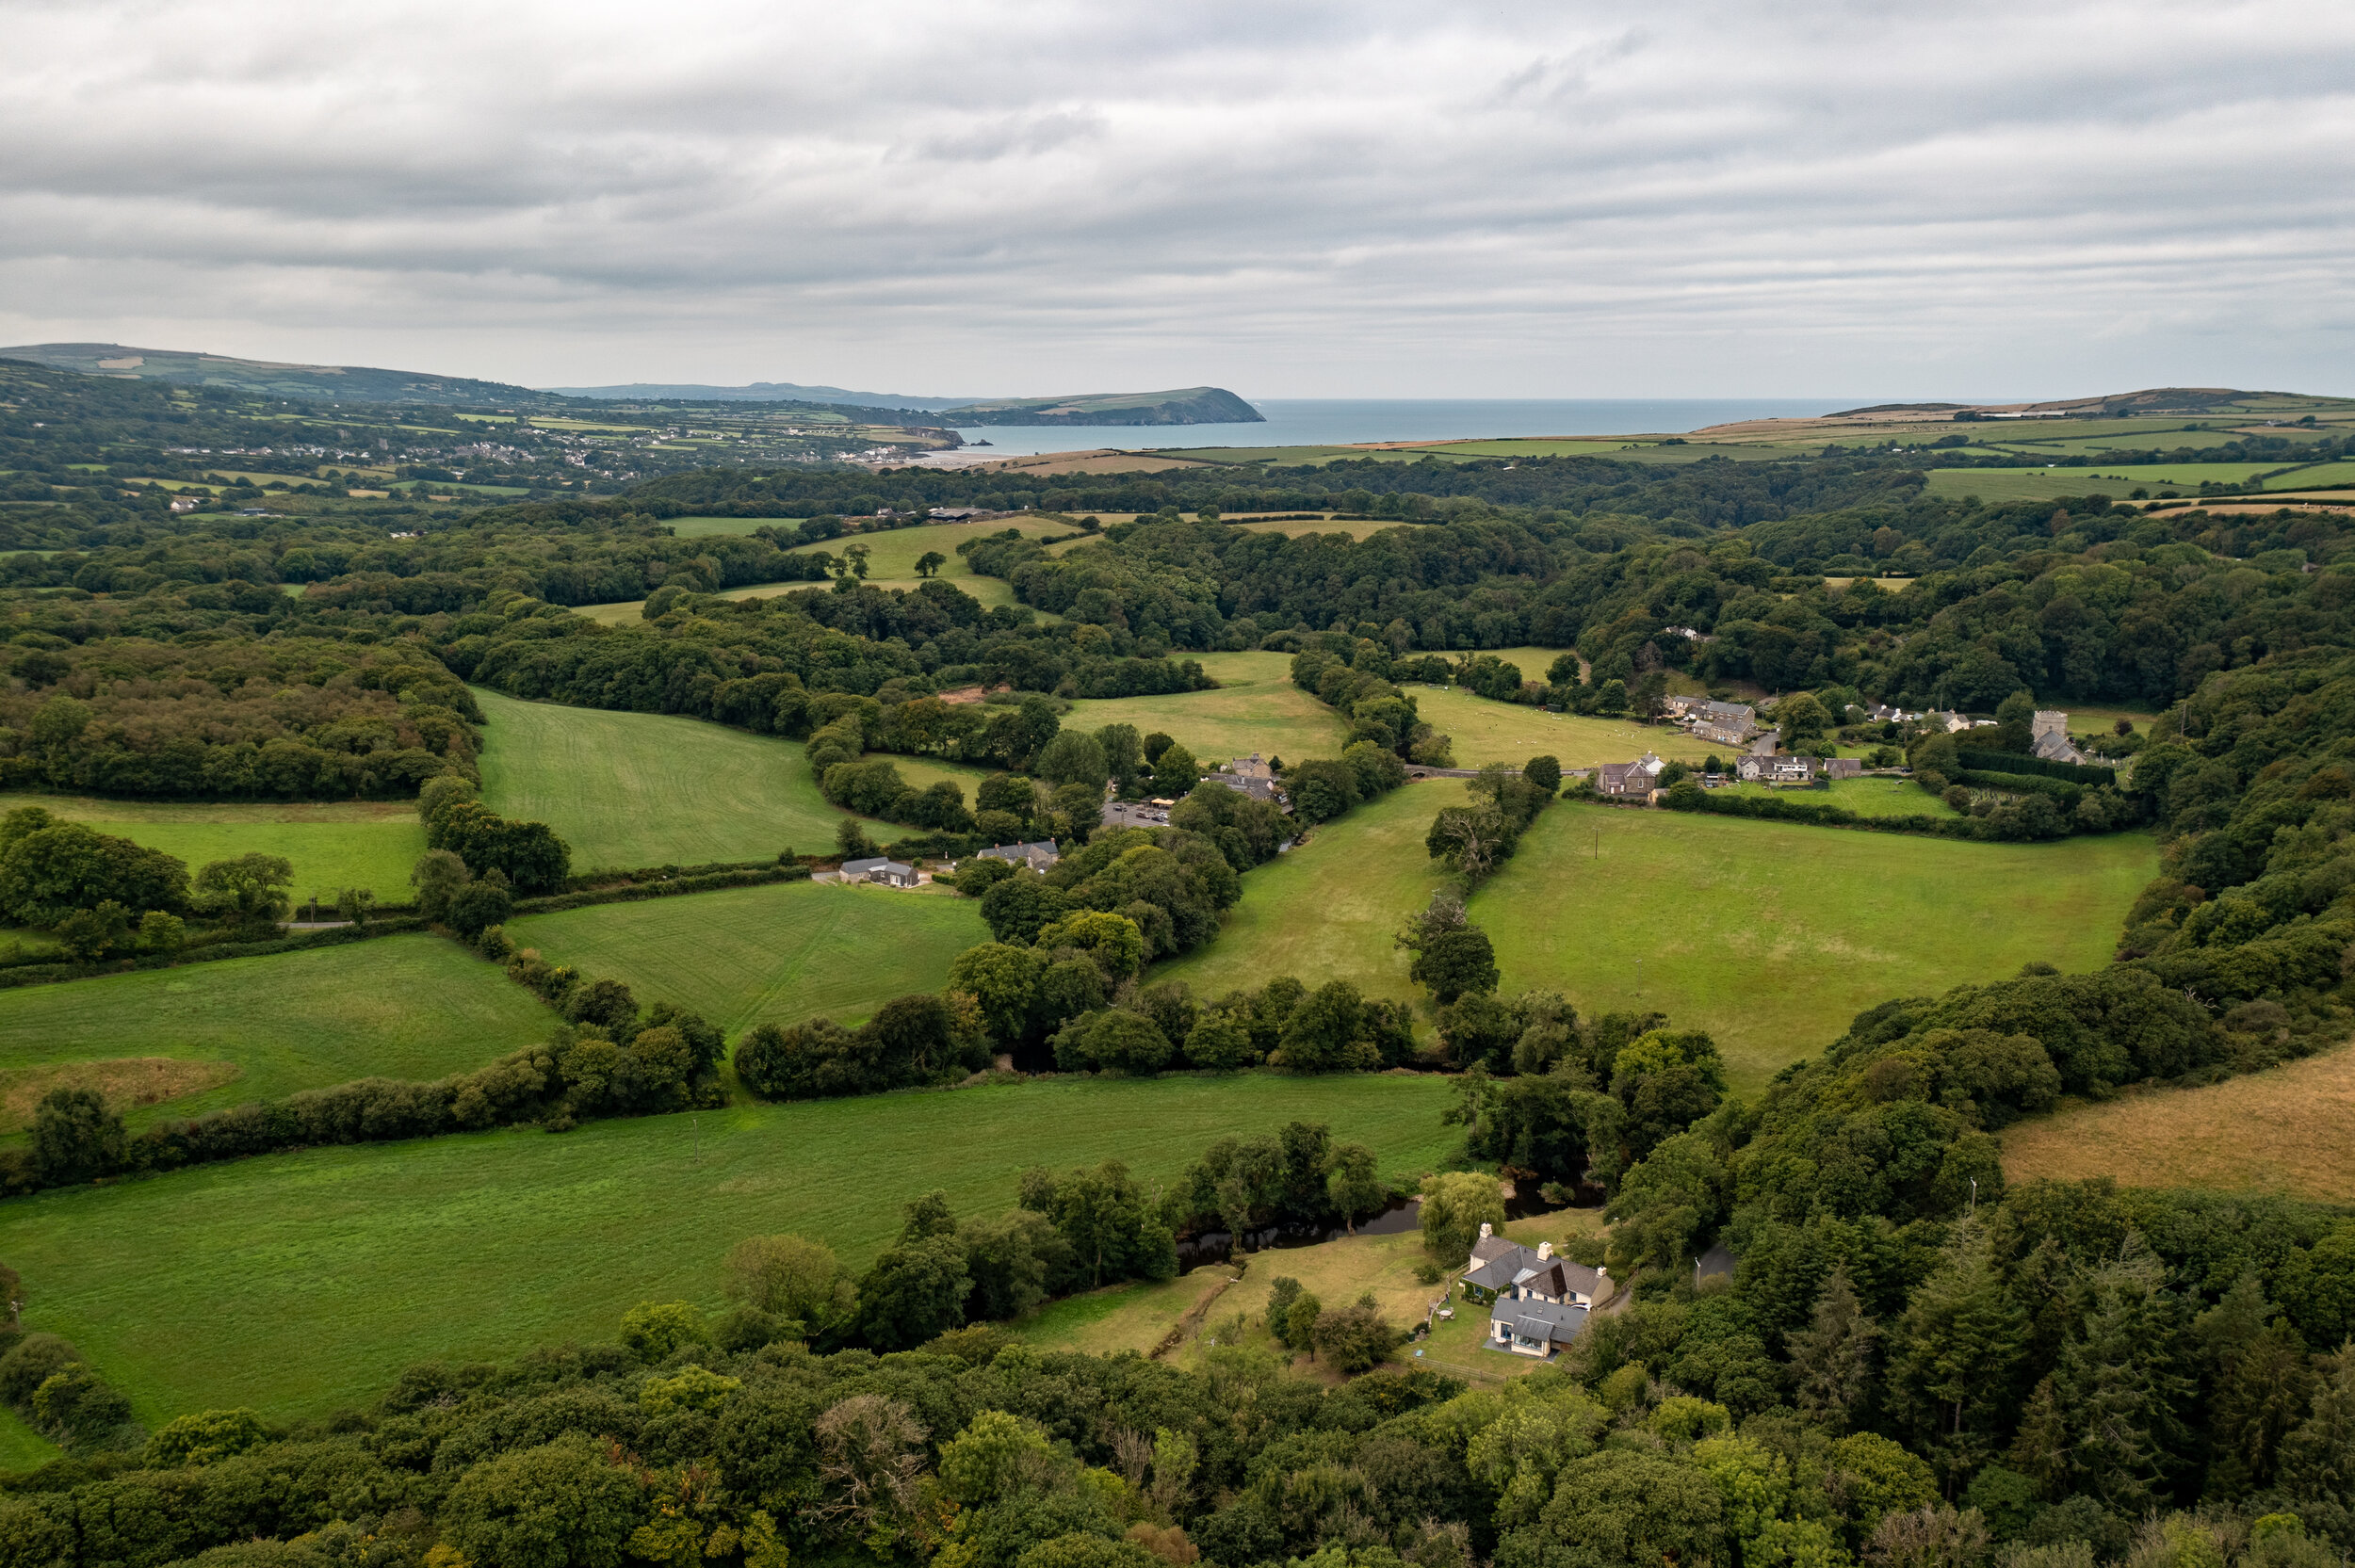 Aerial view from Penwaun (in the foreground) looking down the Nevern Valley towards Newport Bay